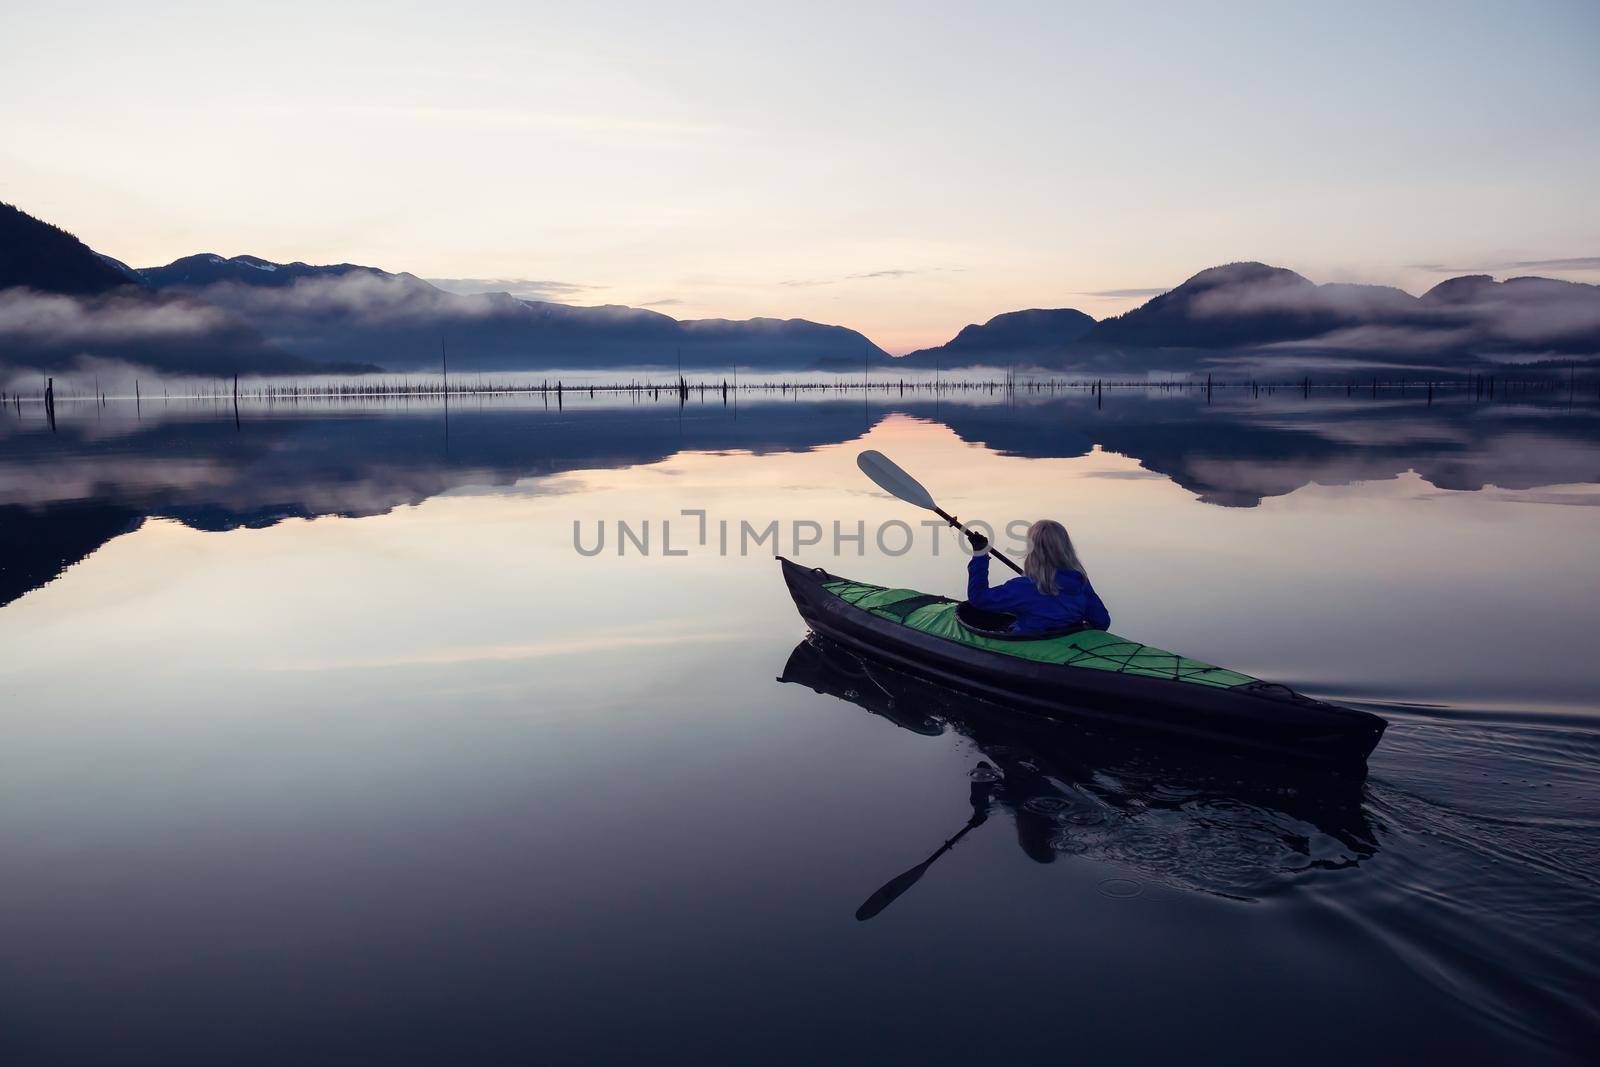 Adventurous Girl kayaking on an infatable kayak in a beautiful lake during a calm and peaceful sunrise. Taken in Stave Lake, East of Vancouver, British Columbia, Canada.